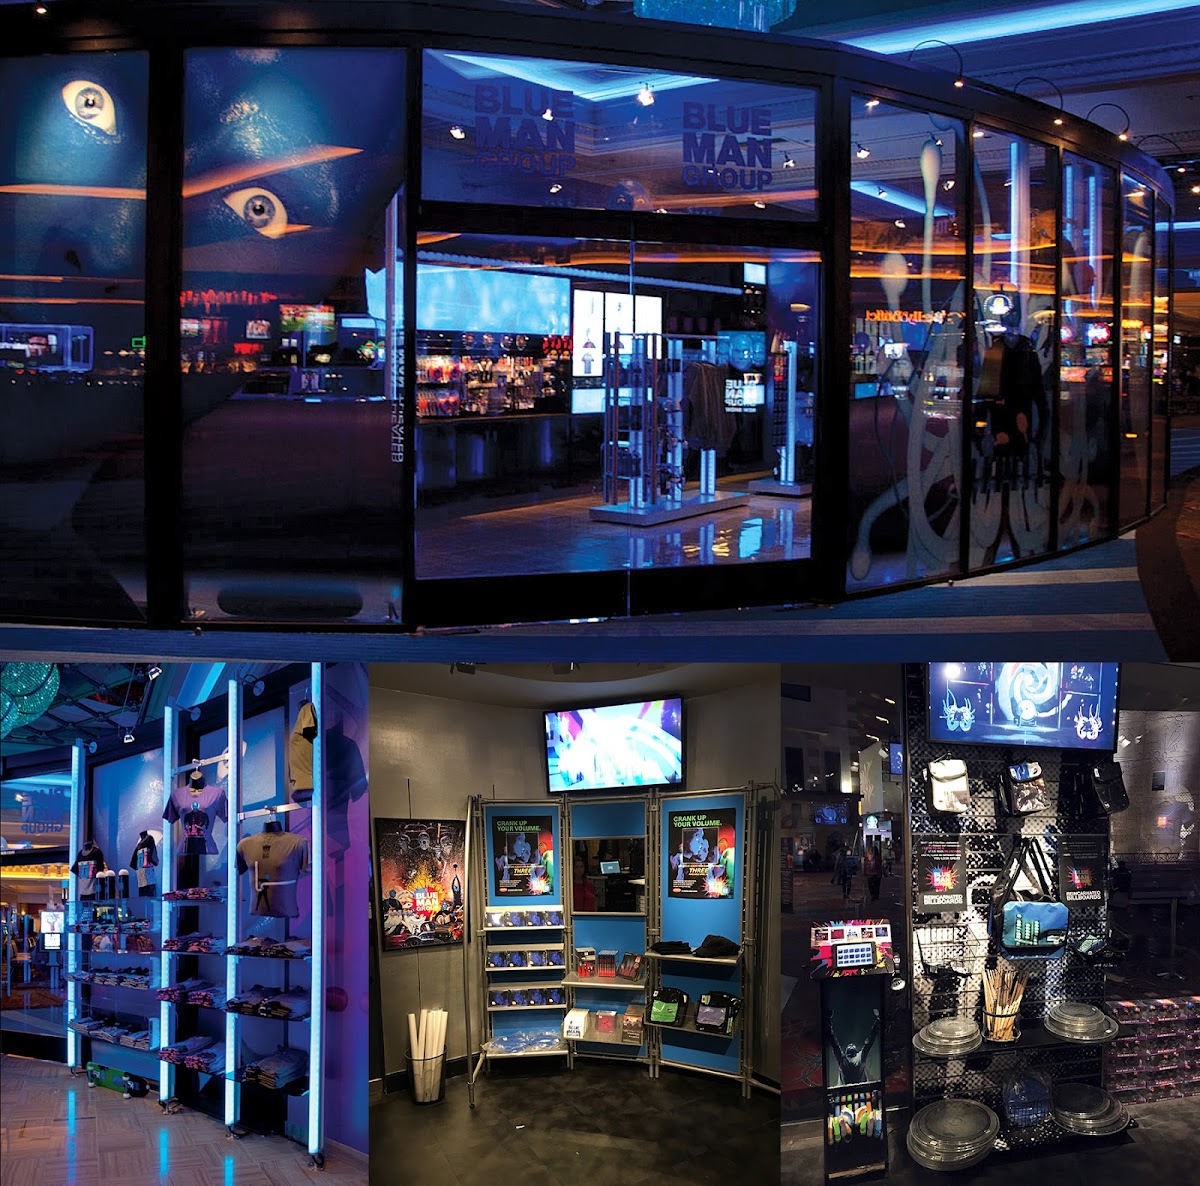 Collage of photos from the different Blue Man Group stores